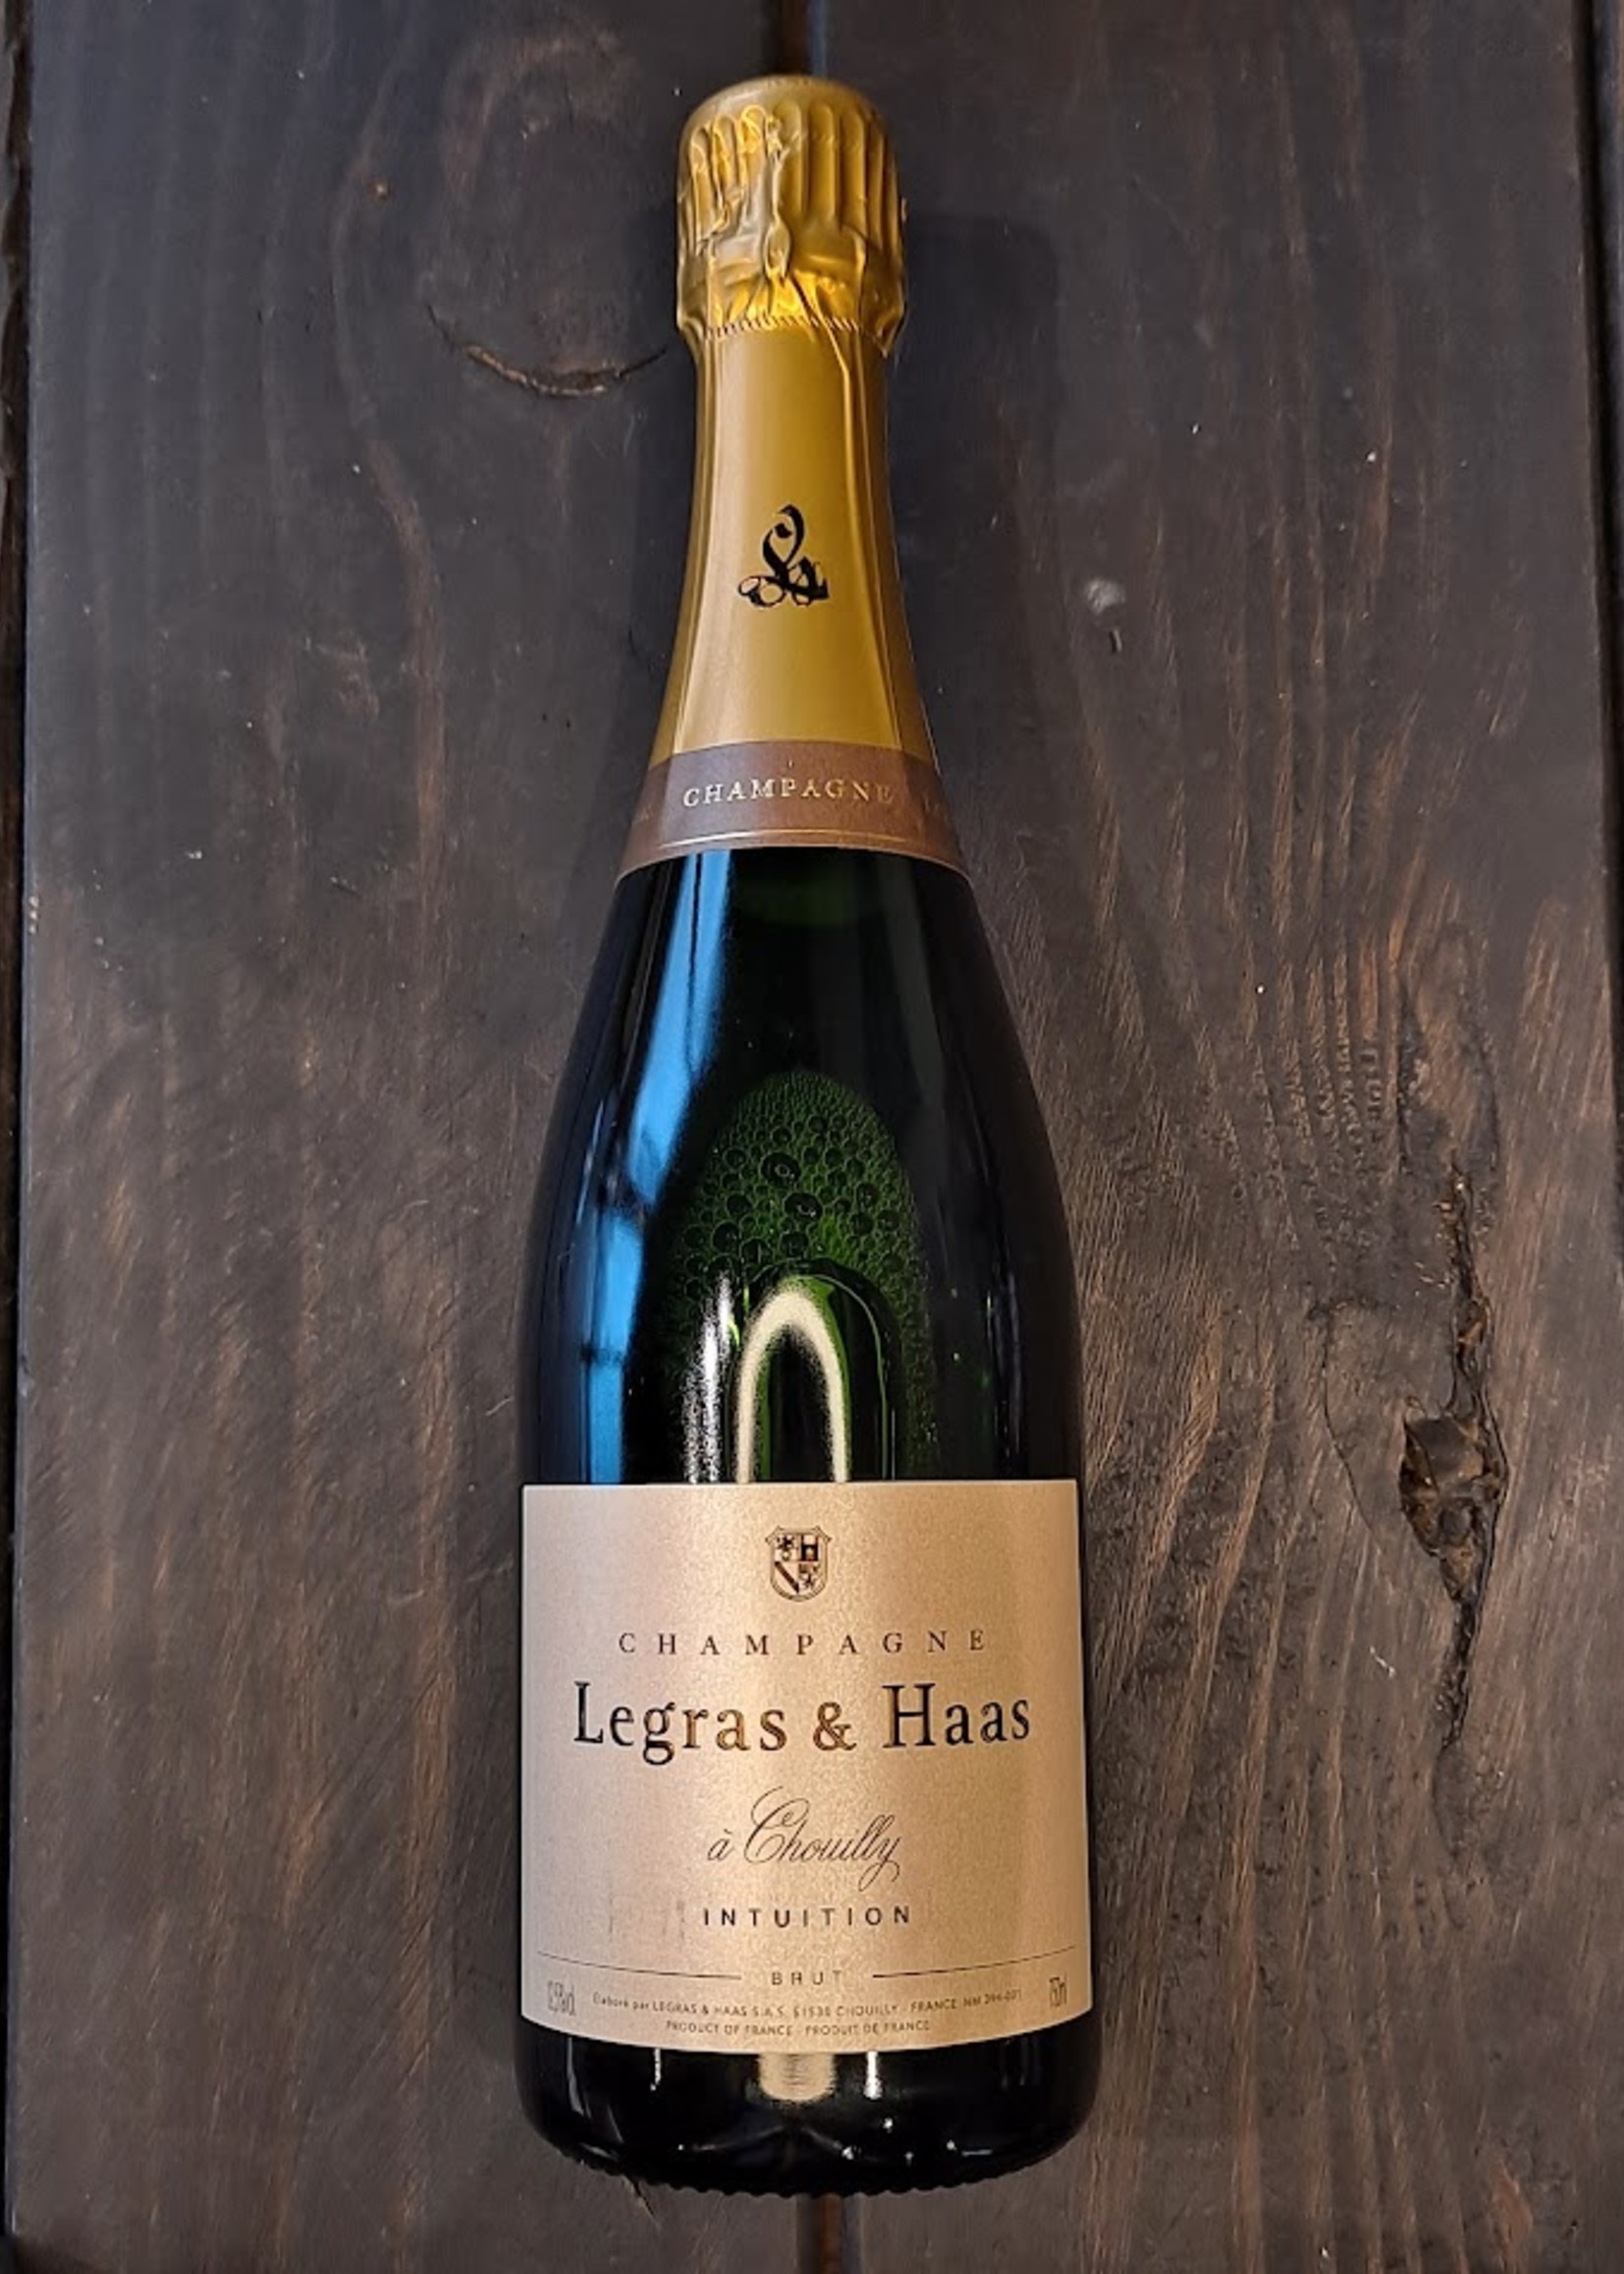 Legras & Haas Champagne Brut Intuition NV